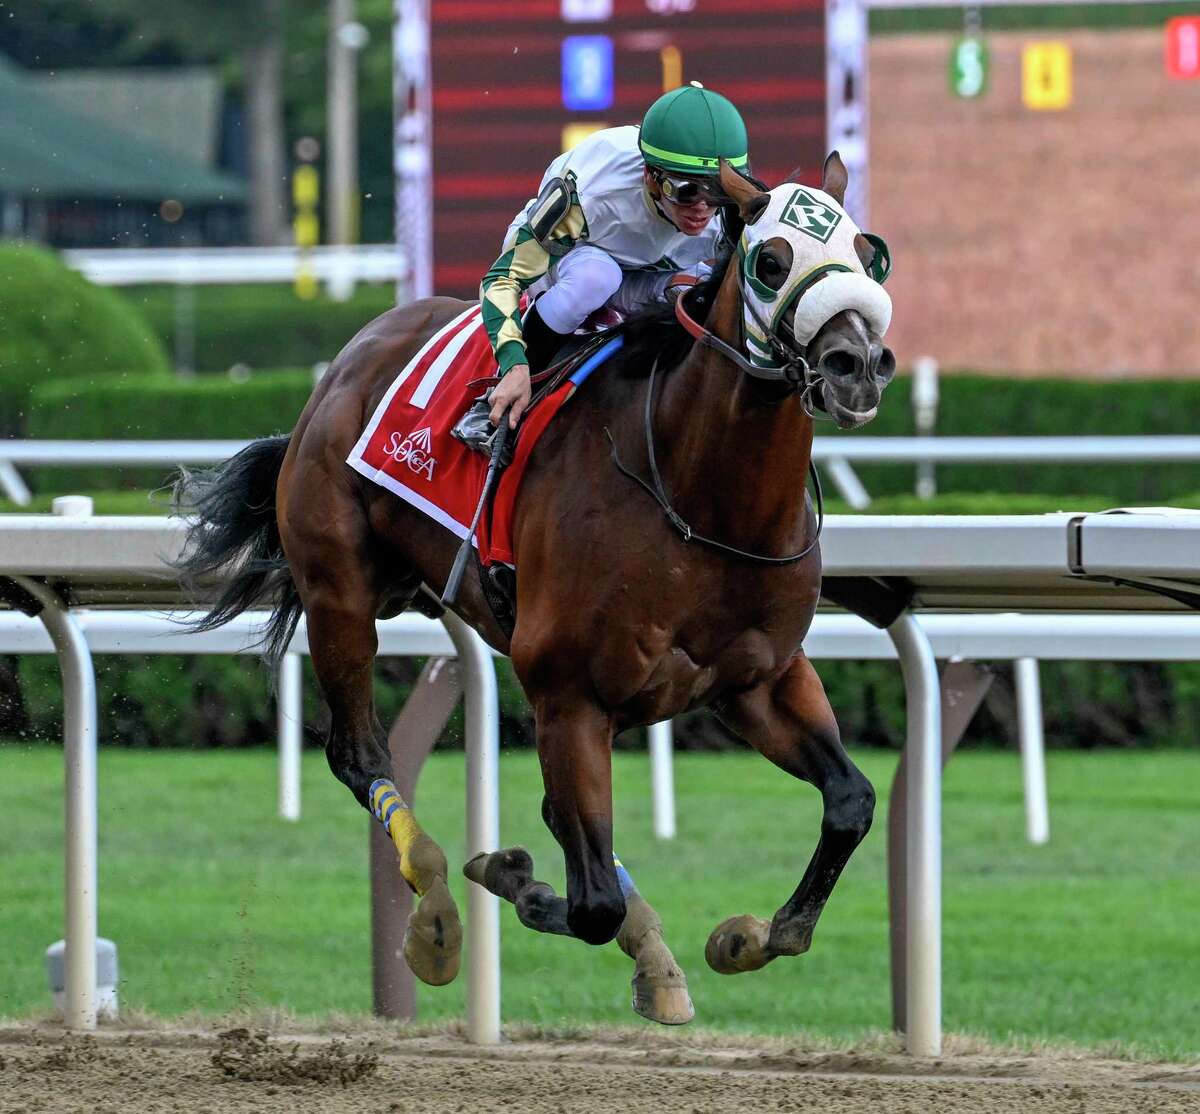 Isolate, ridden by Tyler Gaffalione, wins the ninth running of the Tale of the Cat Stakes on Wednesday, giving trainer Tom Amoss his 4,000th career victory.